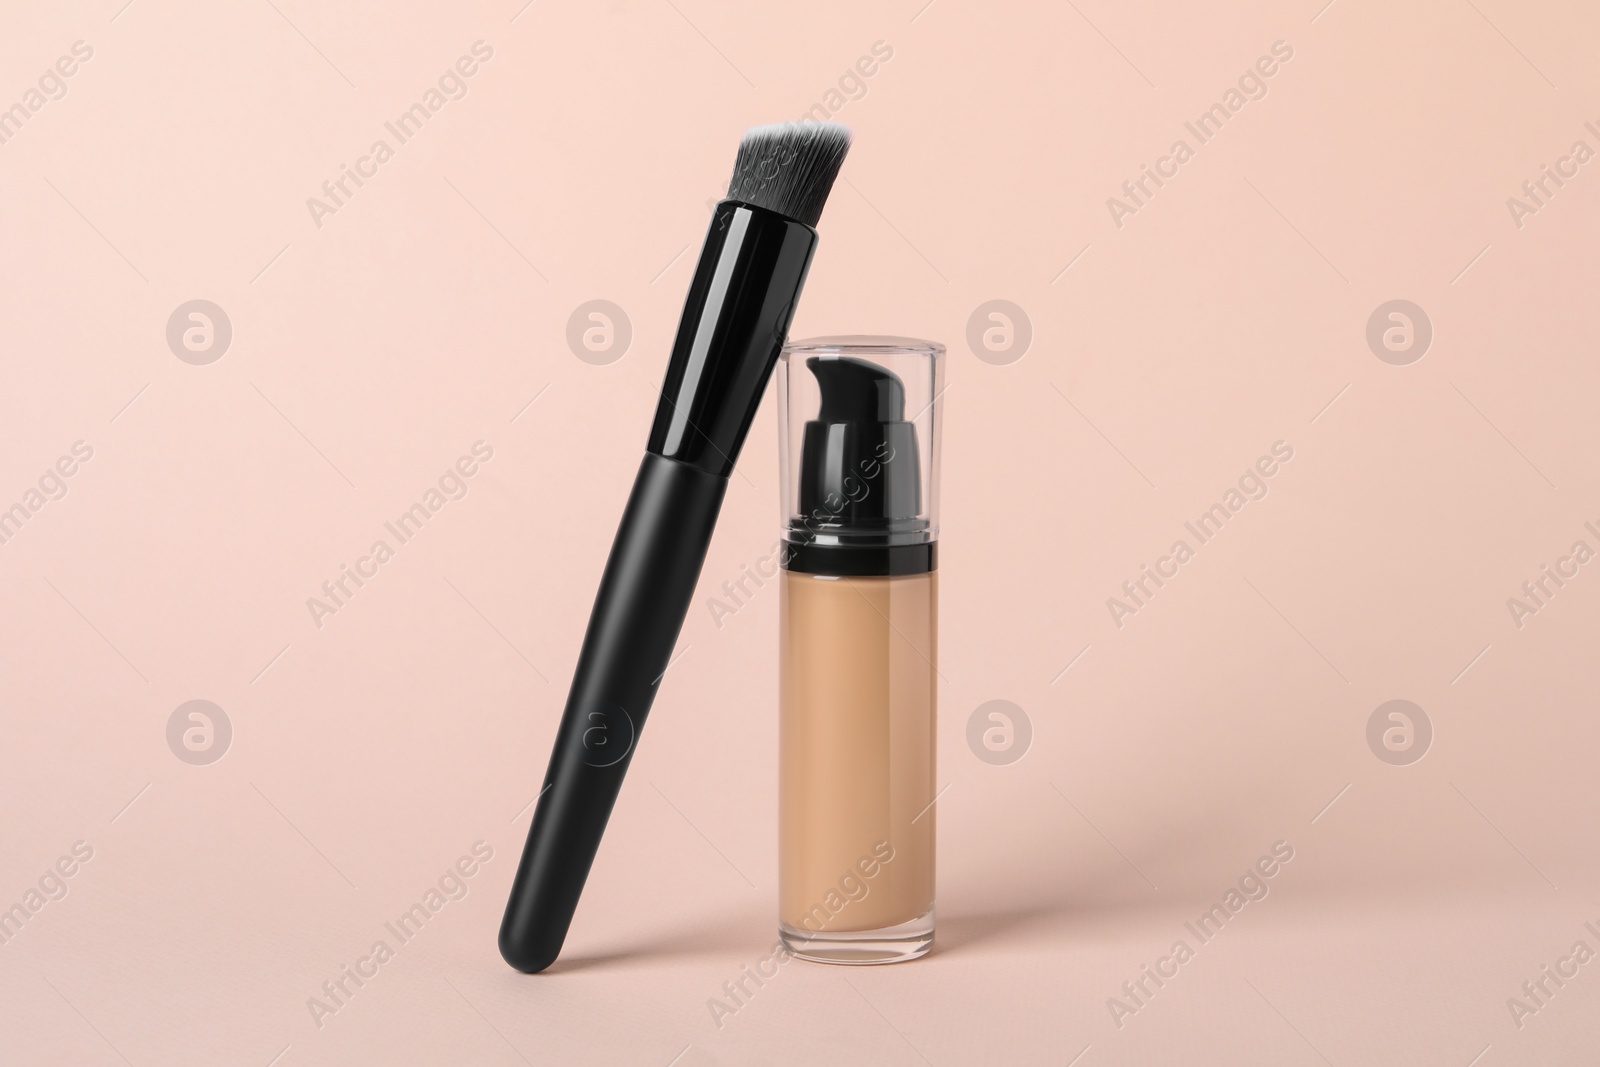 Photo of Bottle of skin foundation and brush on beige background. Makeup product